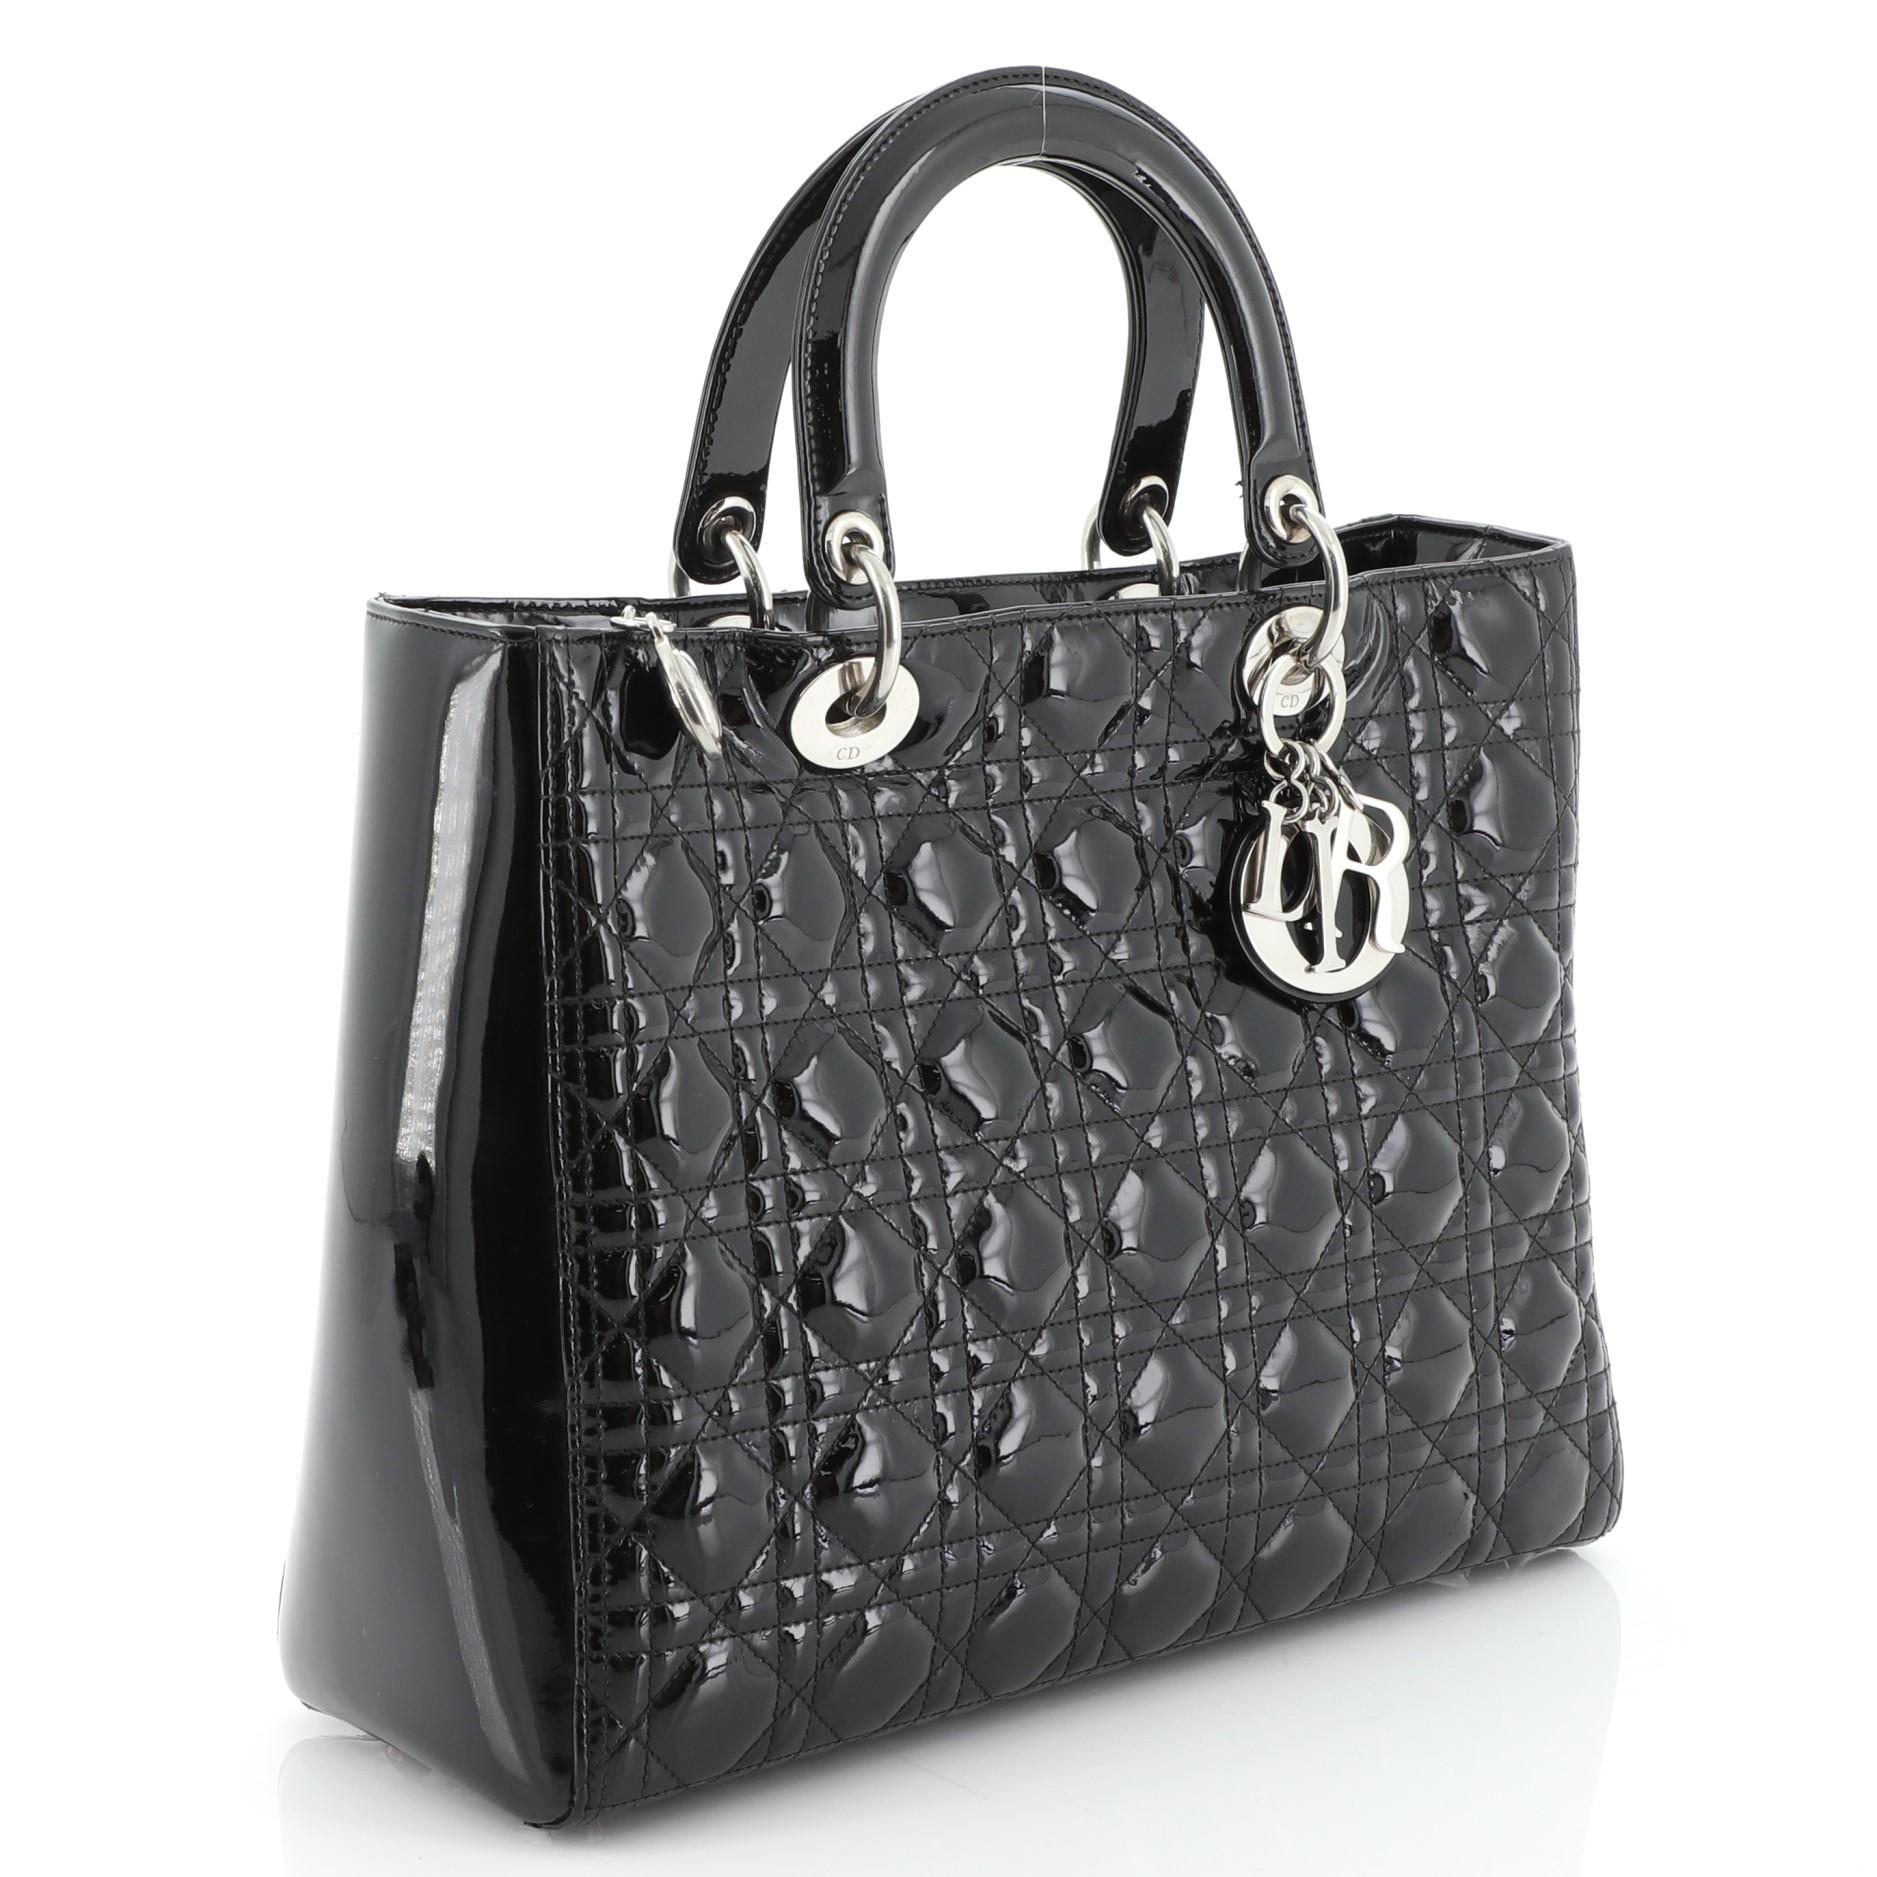 This Christian Dior Vintage Lady Dior Bag Cannage Quilt Patent Large, crafted from black patent leather in Dior's iconic cannage quilting, features dual-rolled handles with sleek Dior charms, protective base studs, and silver-tone hardware. Its top